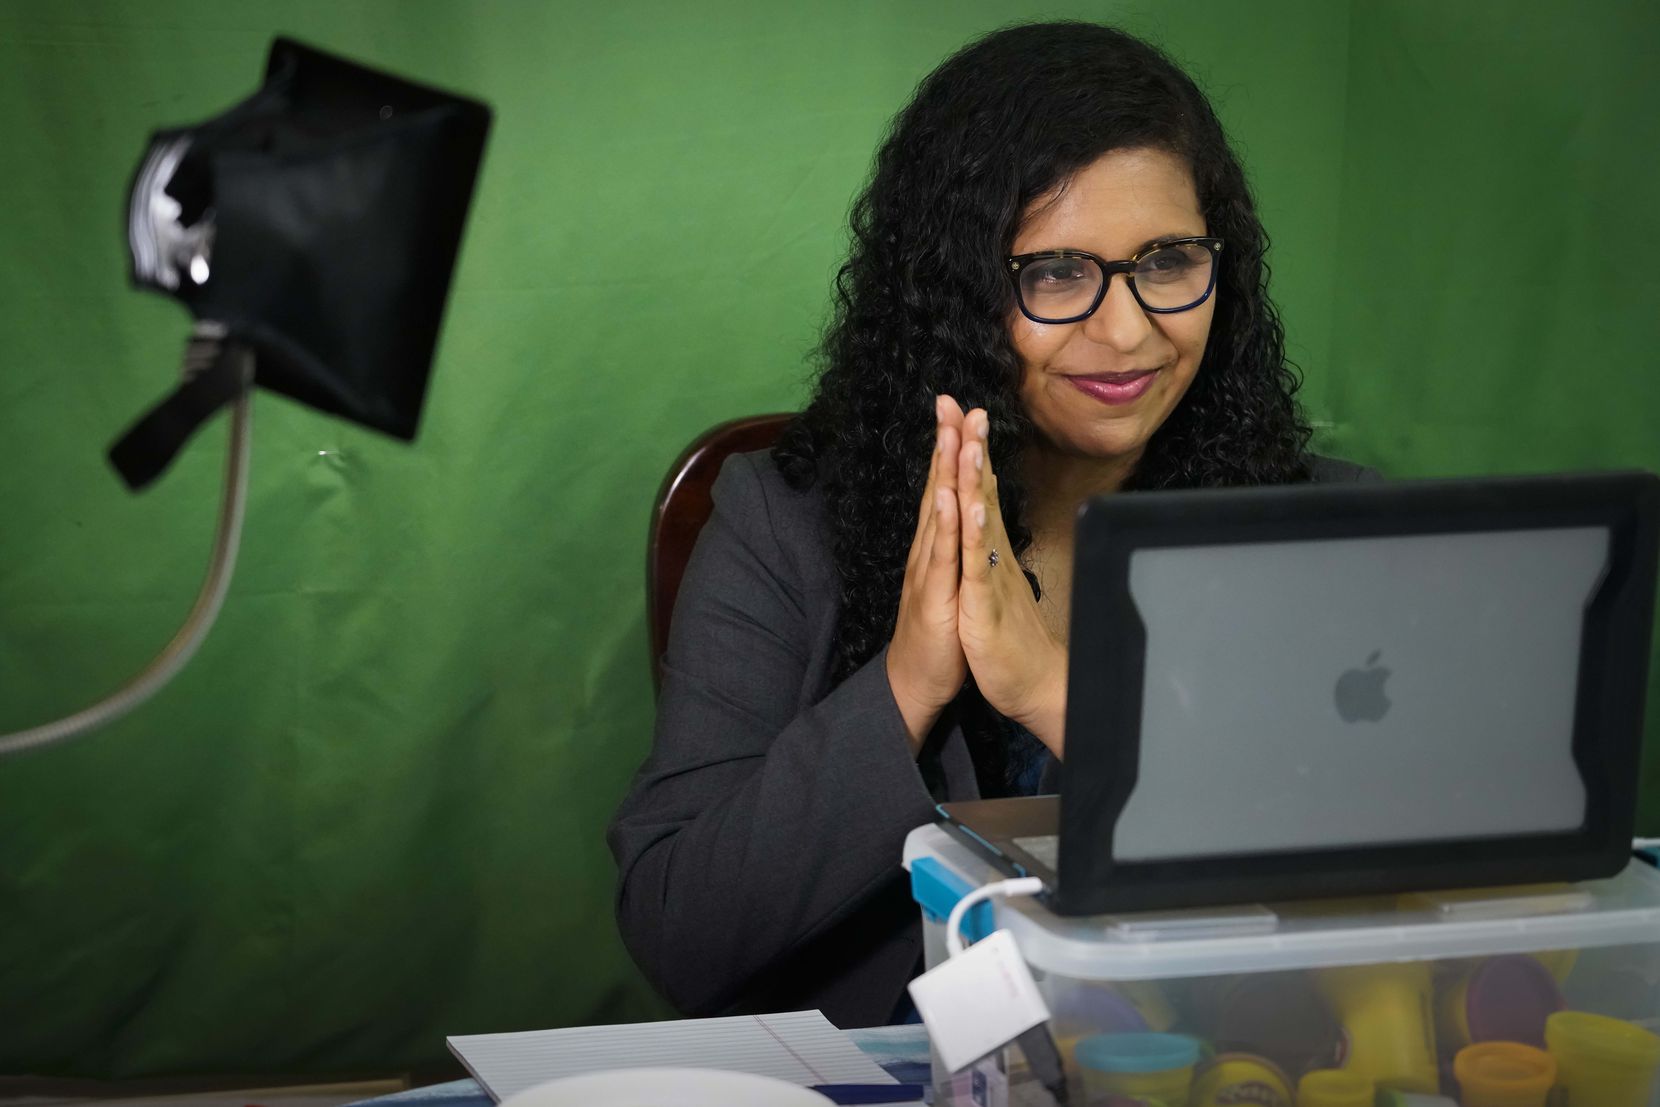 Candace Valenzuela holds a virtual fundraiser from her dining room table on Wednesday, June 24, 2020, in Dallas. (Smiley N. Pool/The Dallas Morning News)